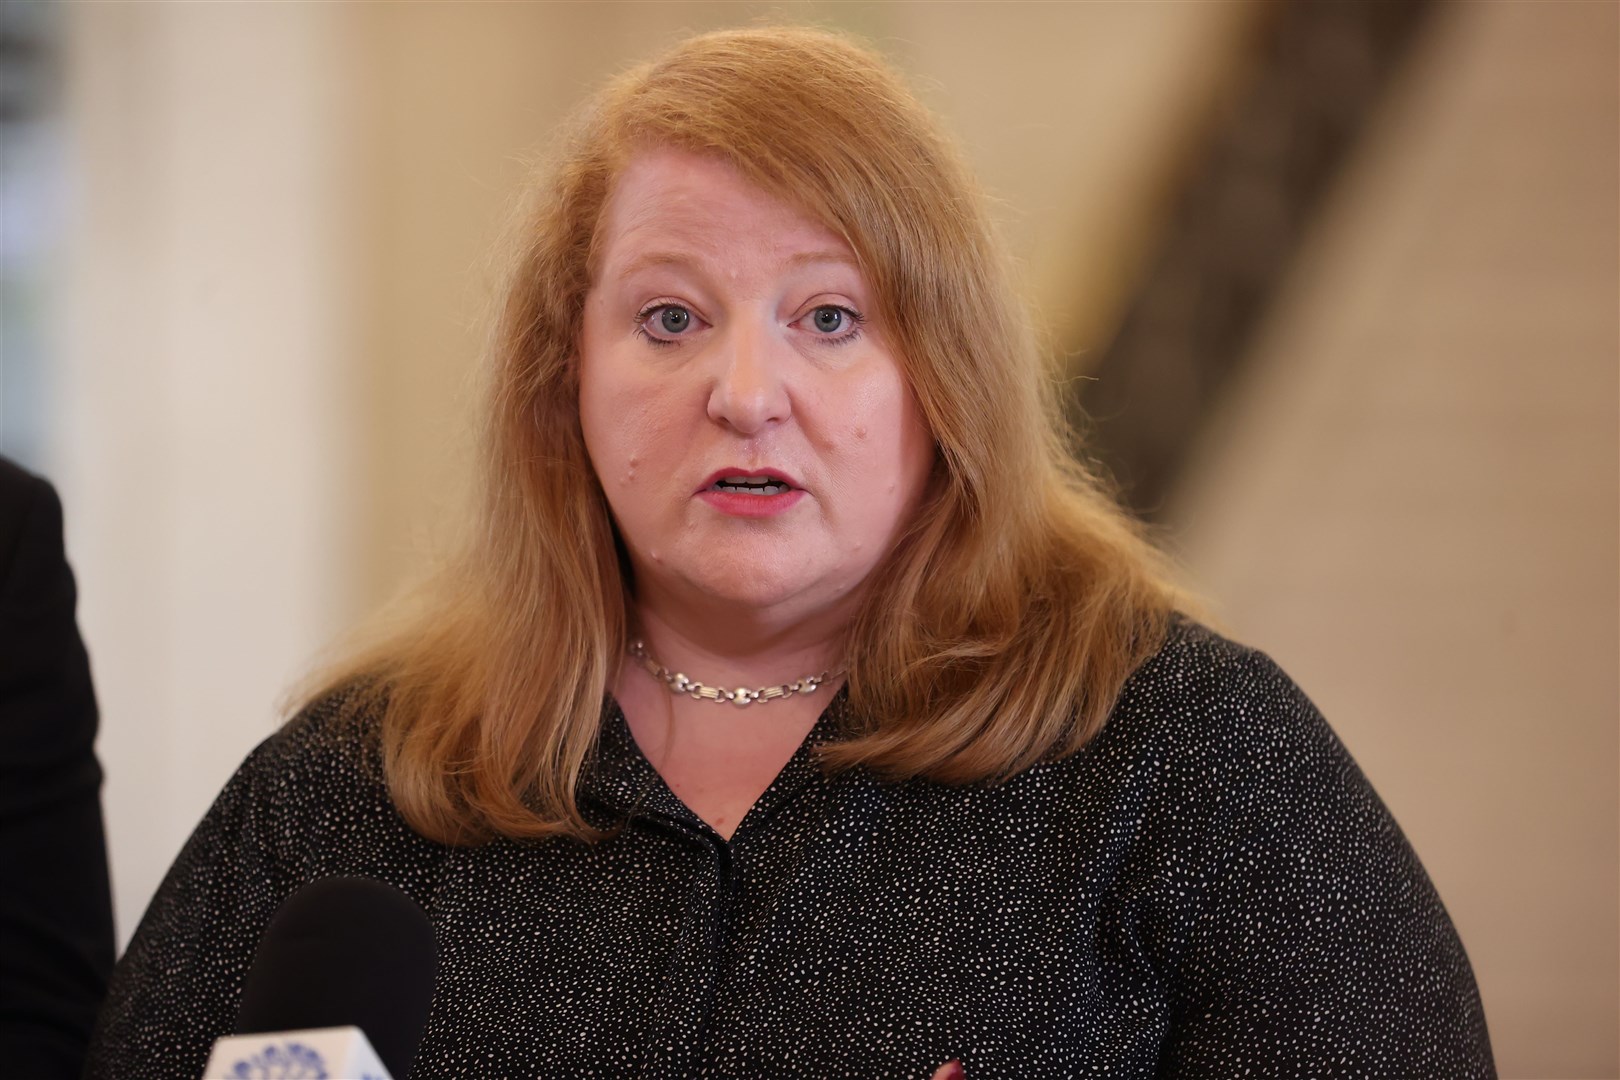 Alliance party leader Naomi Long raised recent diplomatic tensions between the UK and Ireland over migration issues (Liam McBurney/PA)